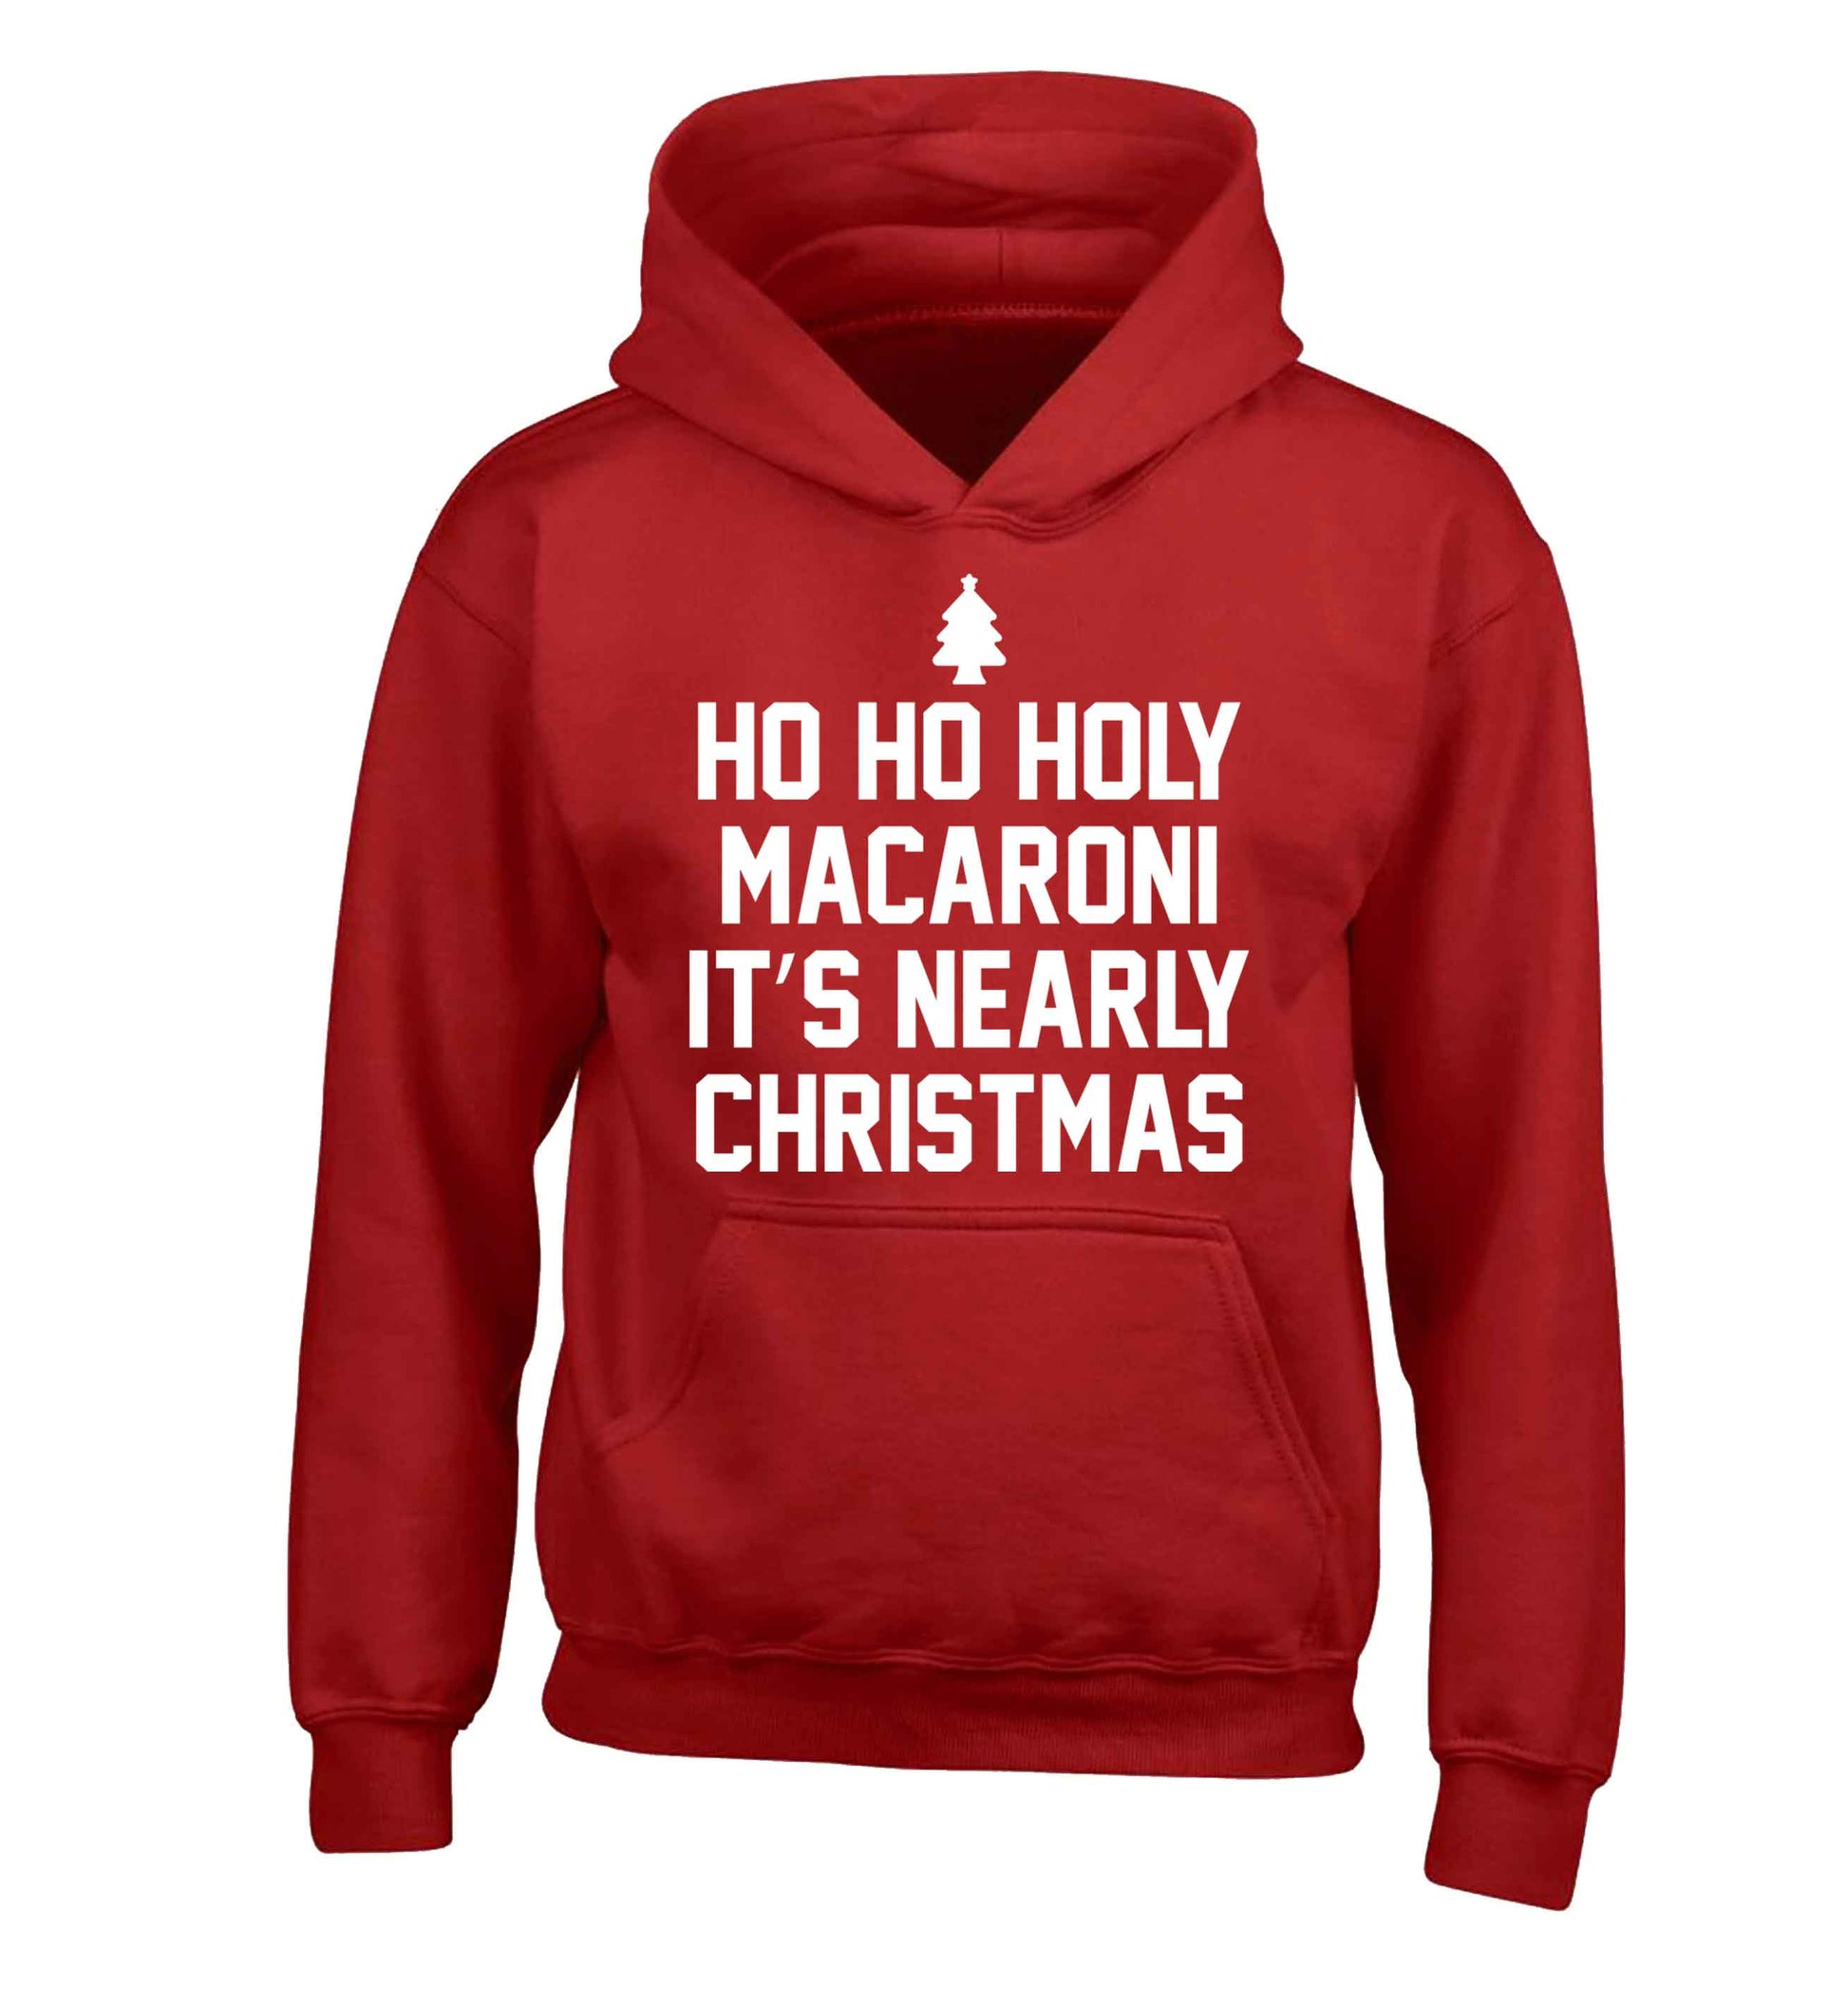 Ho ho holy macaroni it's nearly Christmas children's red hoodie 12-13 Years